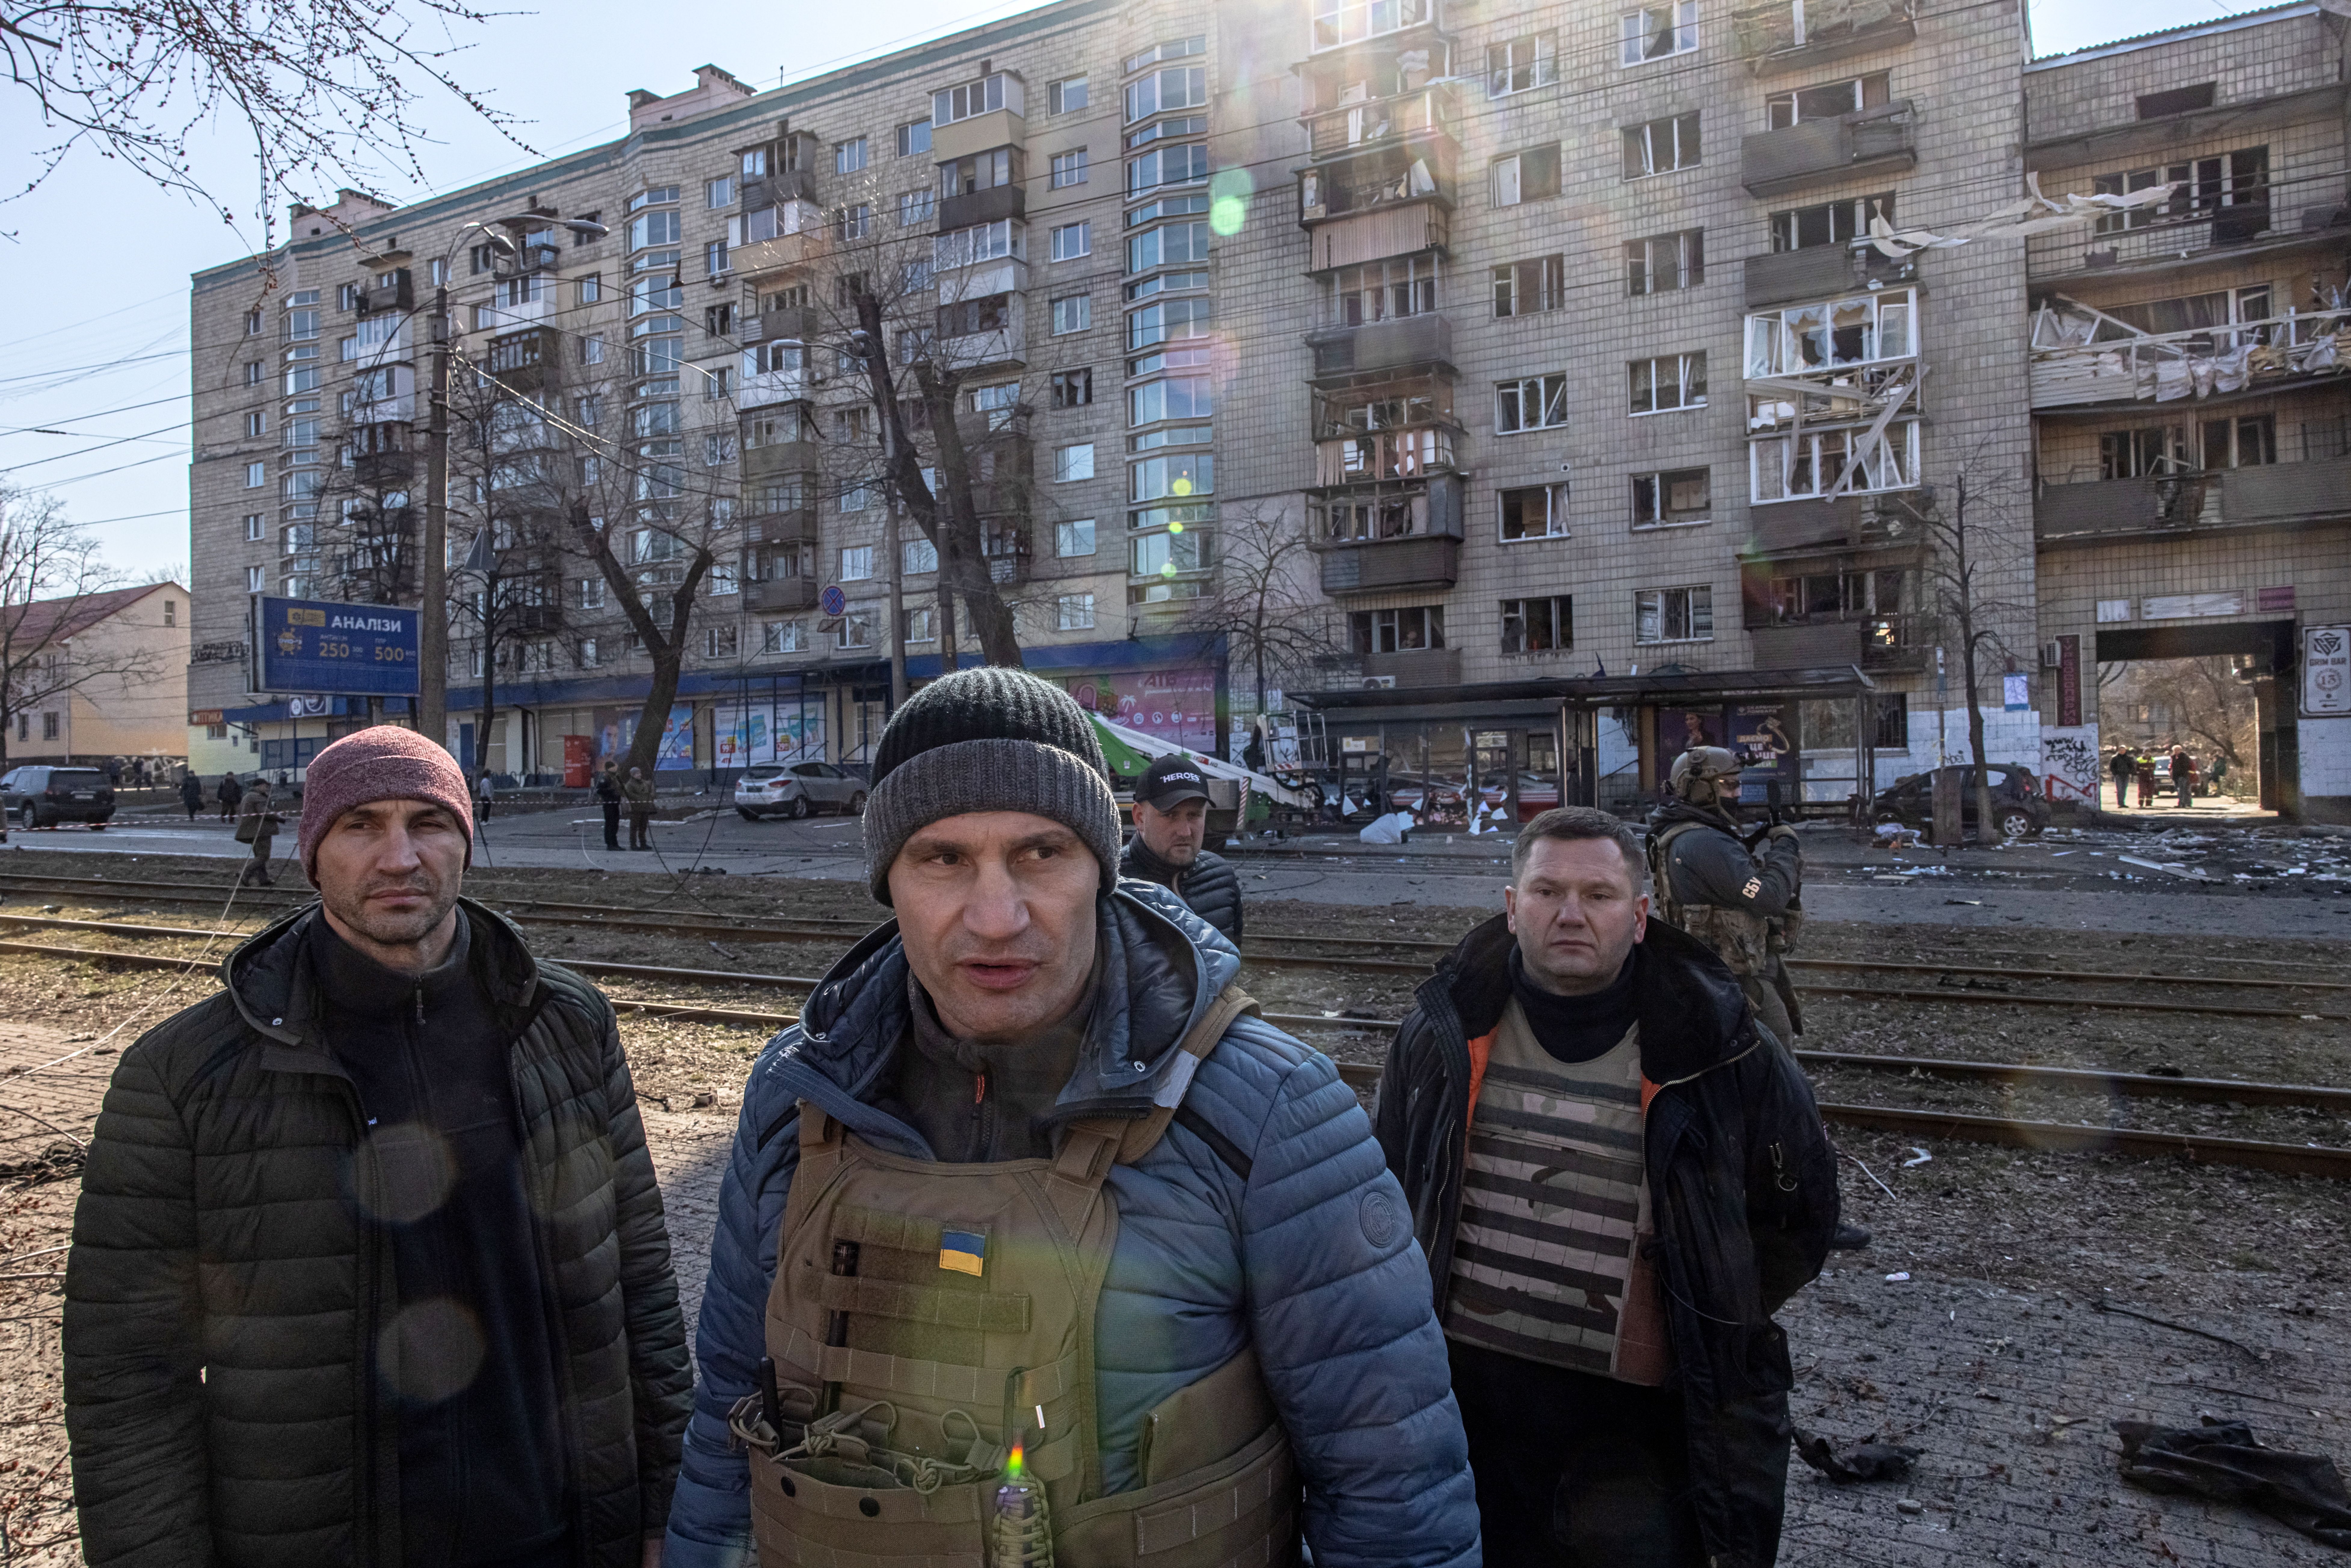 Kyiv's Mayor Vitaly Klitschko (C) and his brother Vladimir Klitschko (L) visit a residential area after shelling in Kyiv, Ukraine, on 14 March.